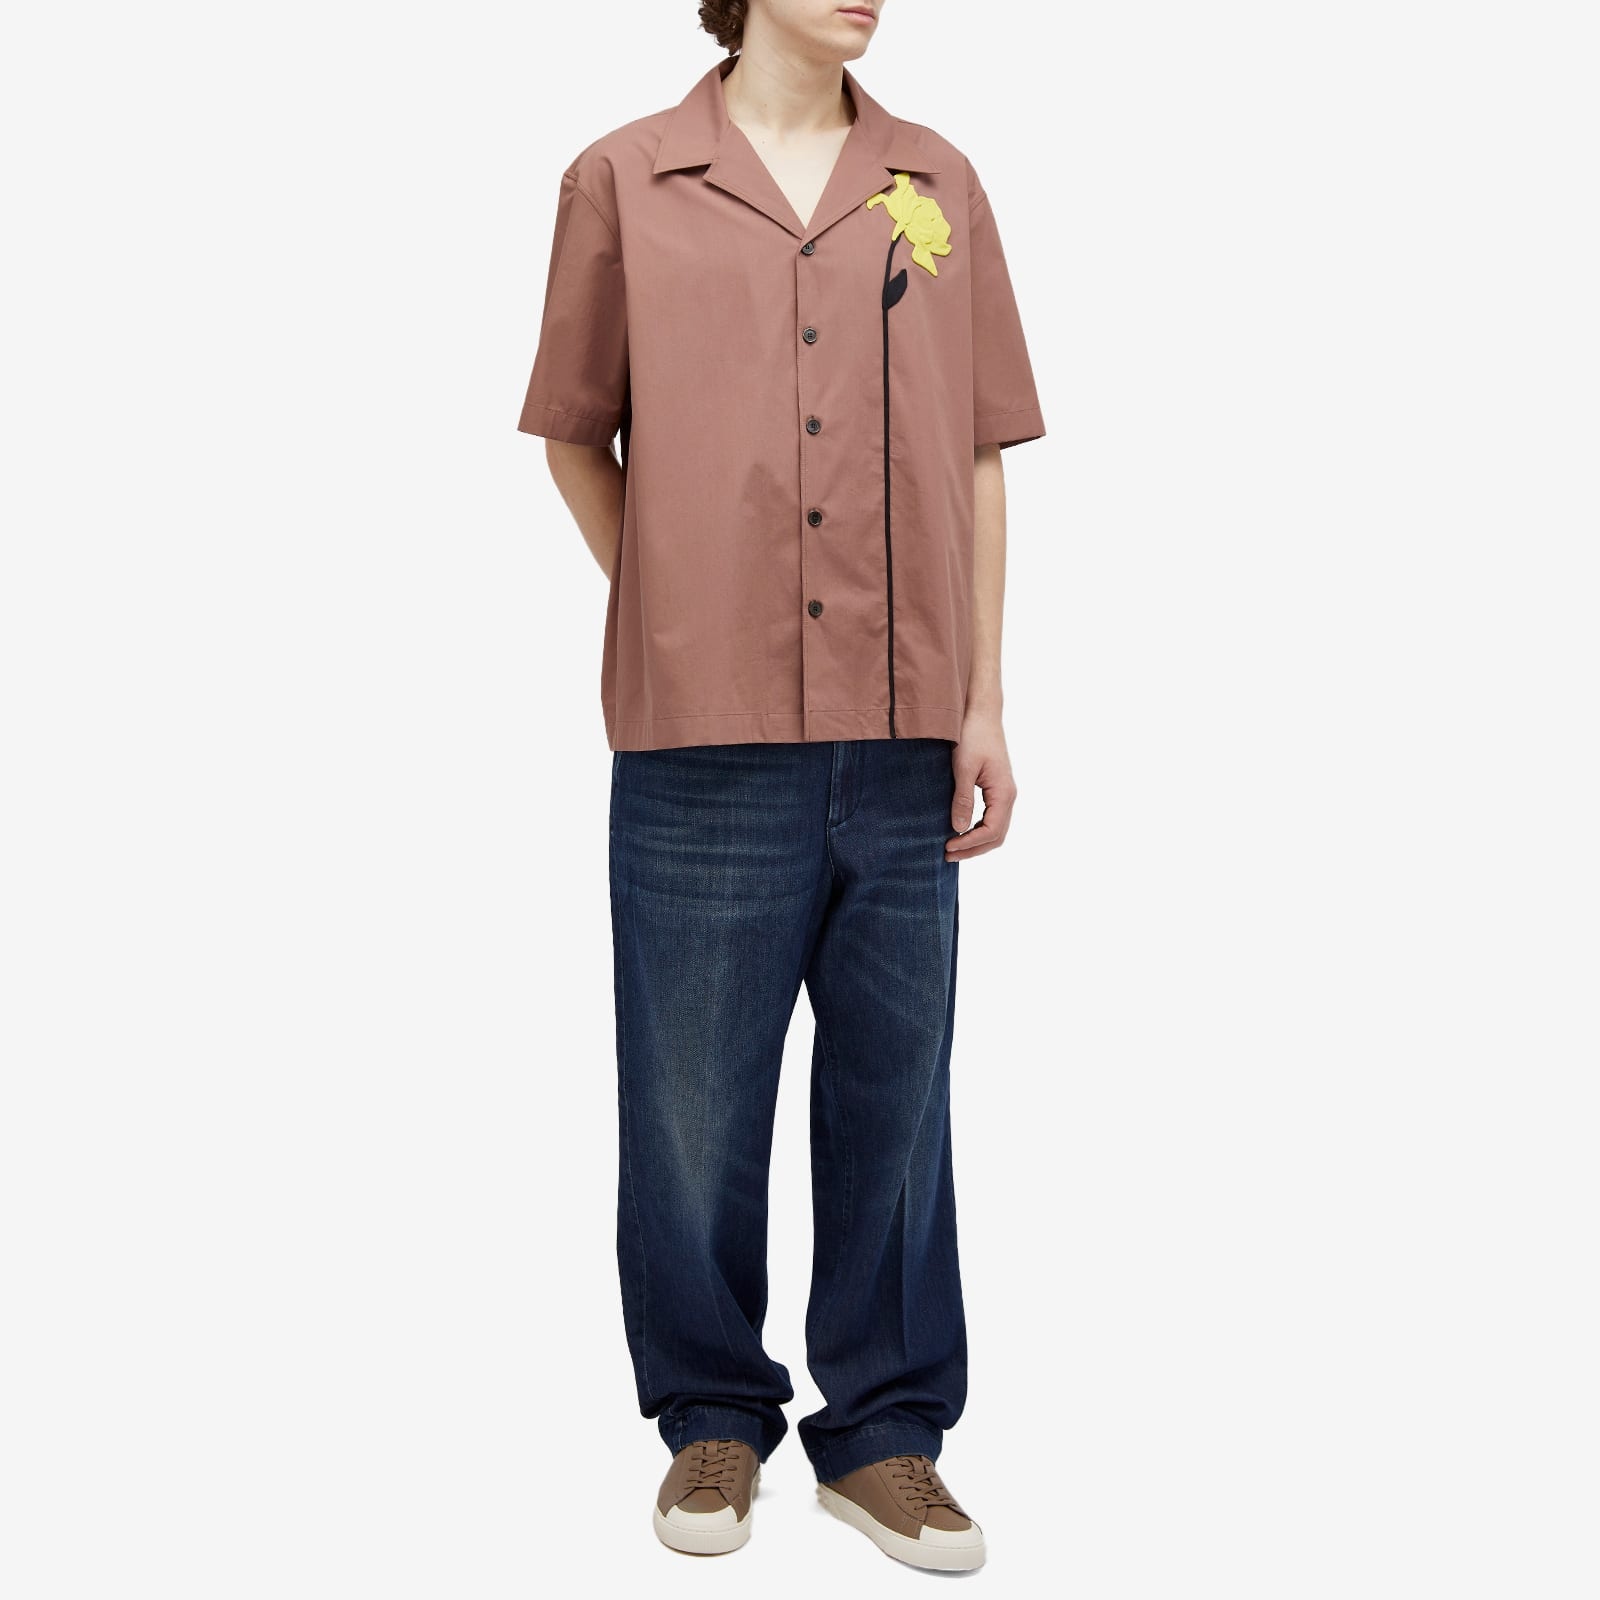 Valentino Flower Embroidery Vacation Shirt - 4